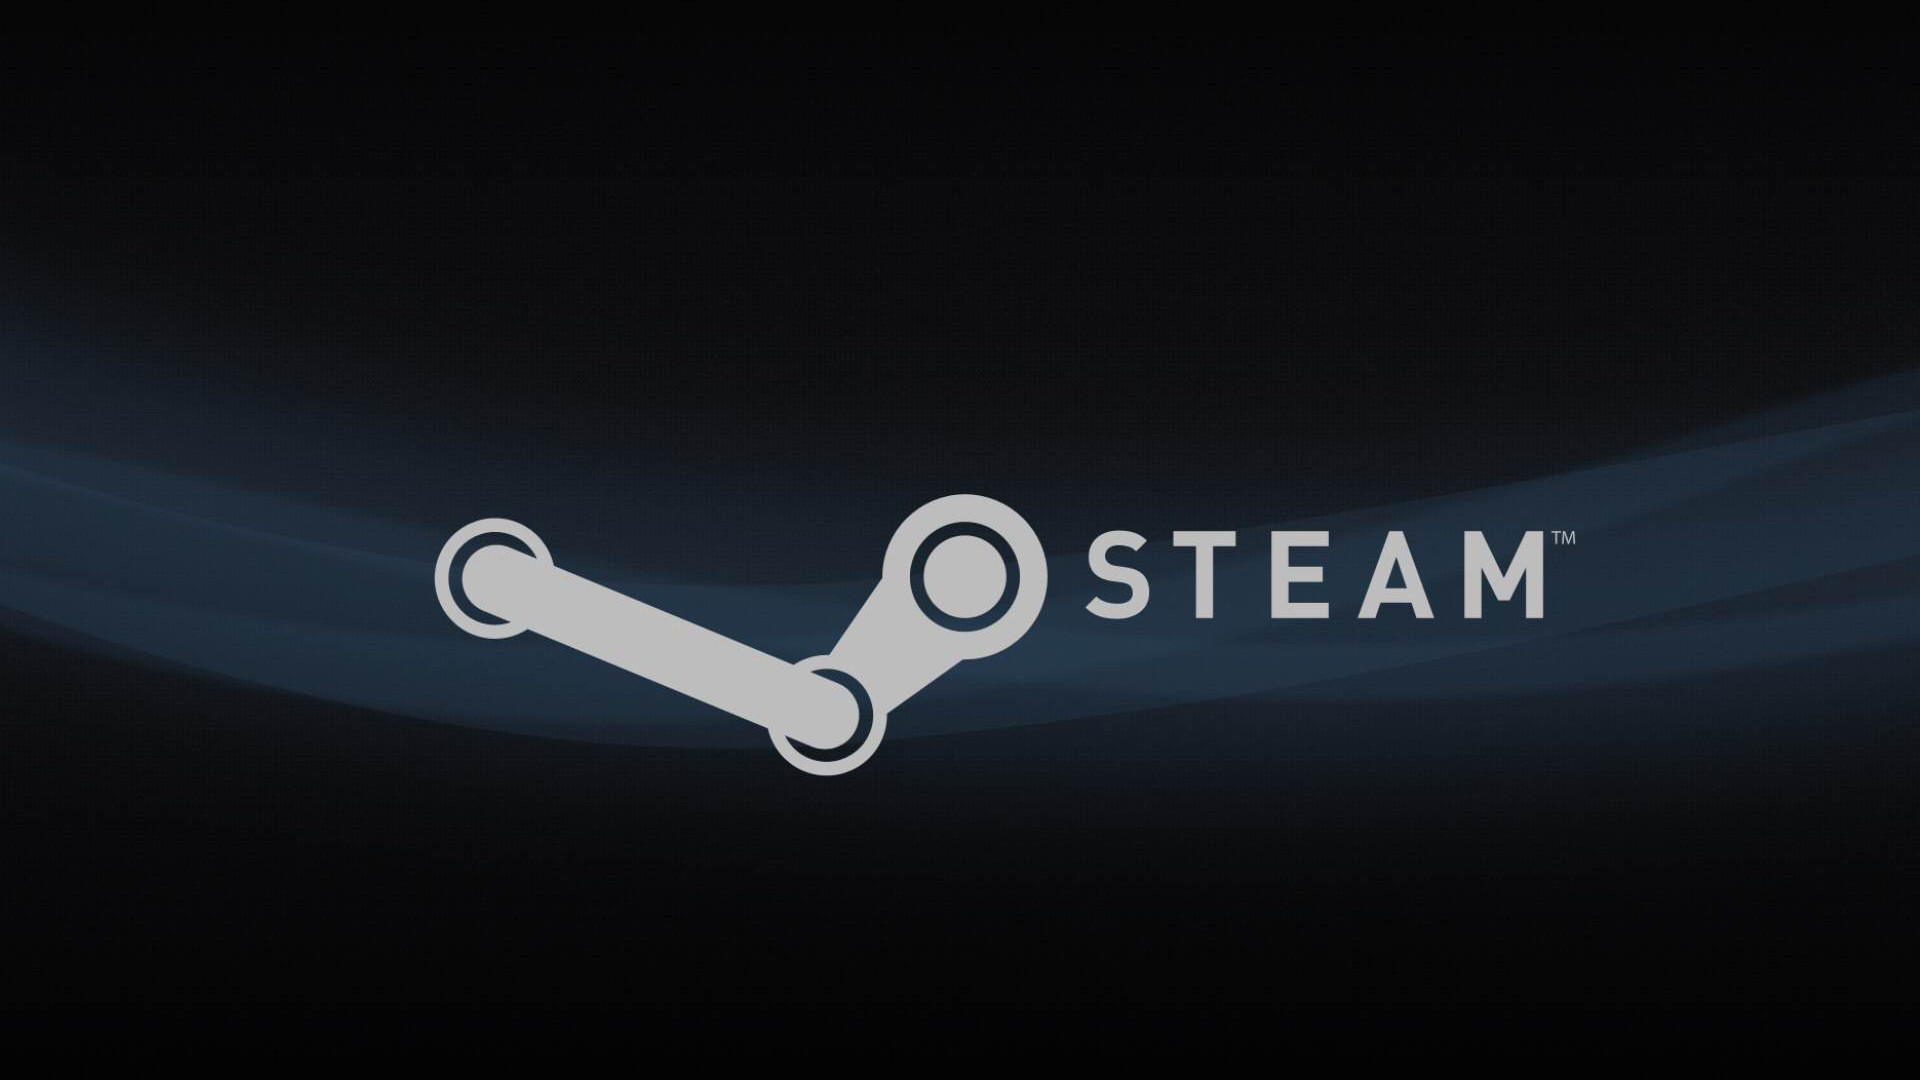 STEAM WALLPAPERS FREE Wallpapers Background Images